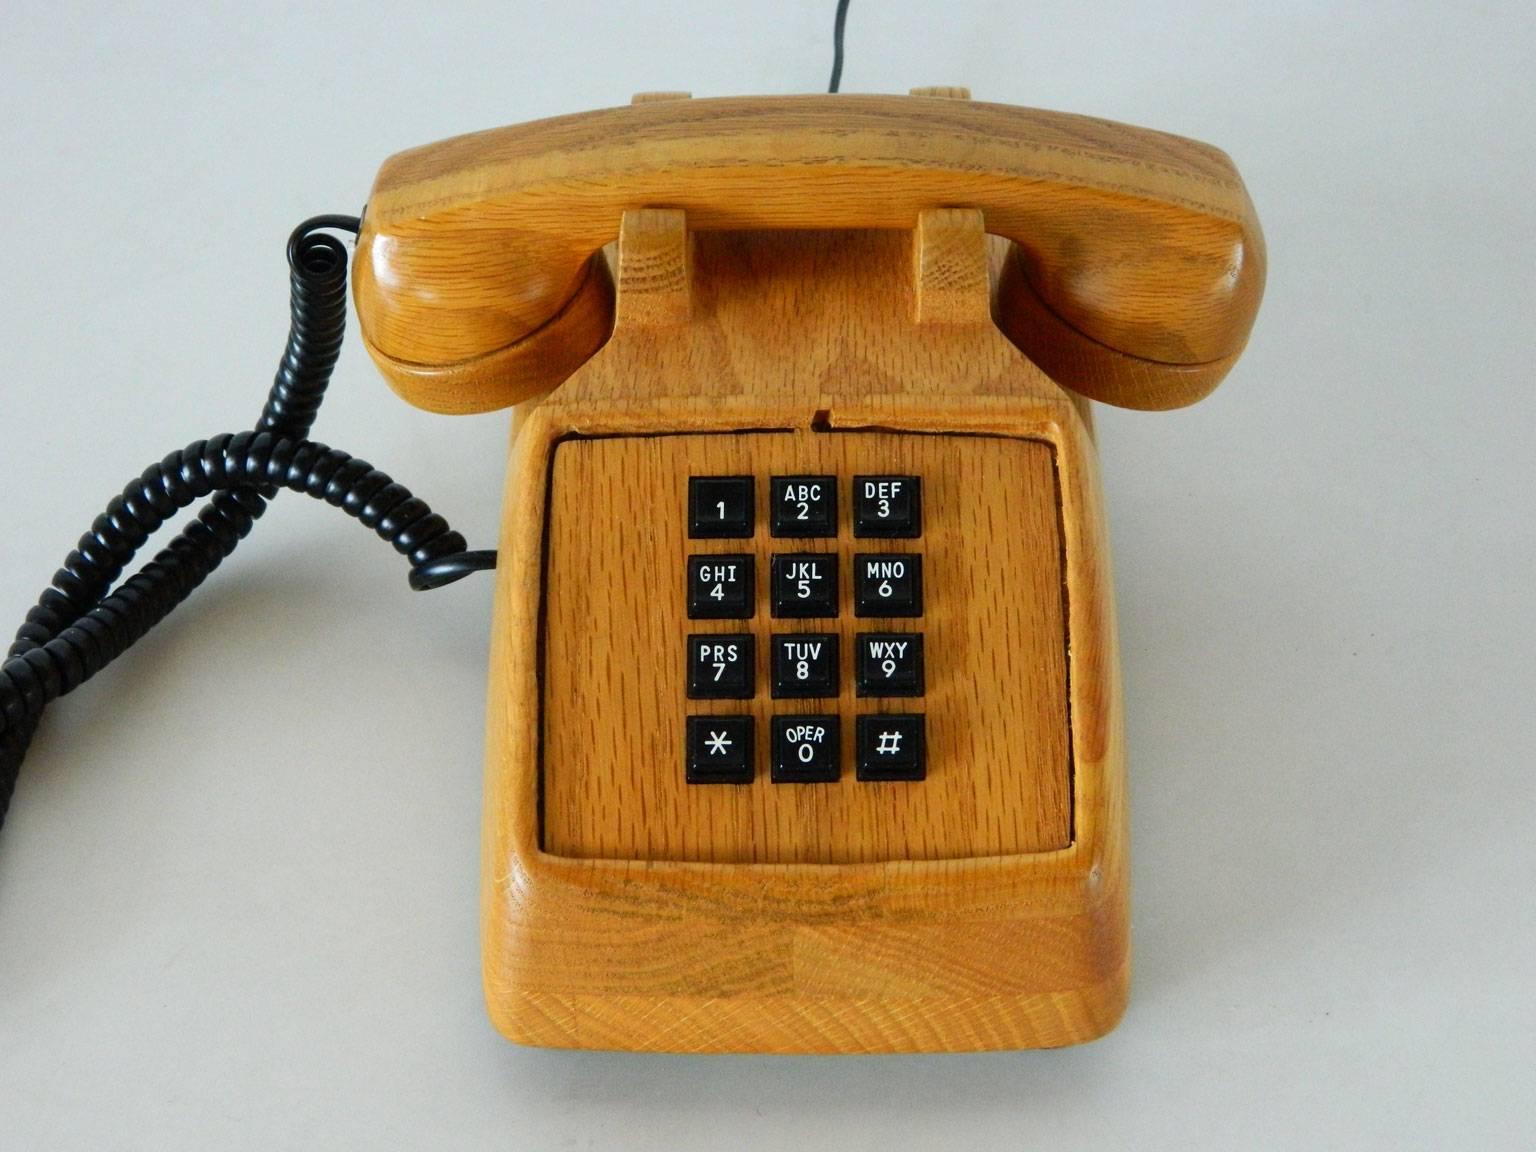 Vintage touch-tone telephone with warm wood harkens back to a time when one had to sit while talking on the phone. Manufactured in 1987, this telephone requires a landline and phone jack.